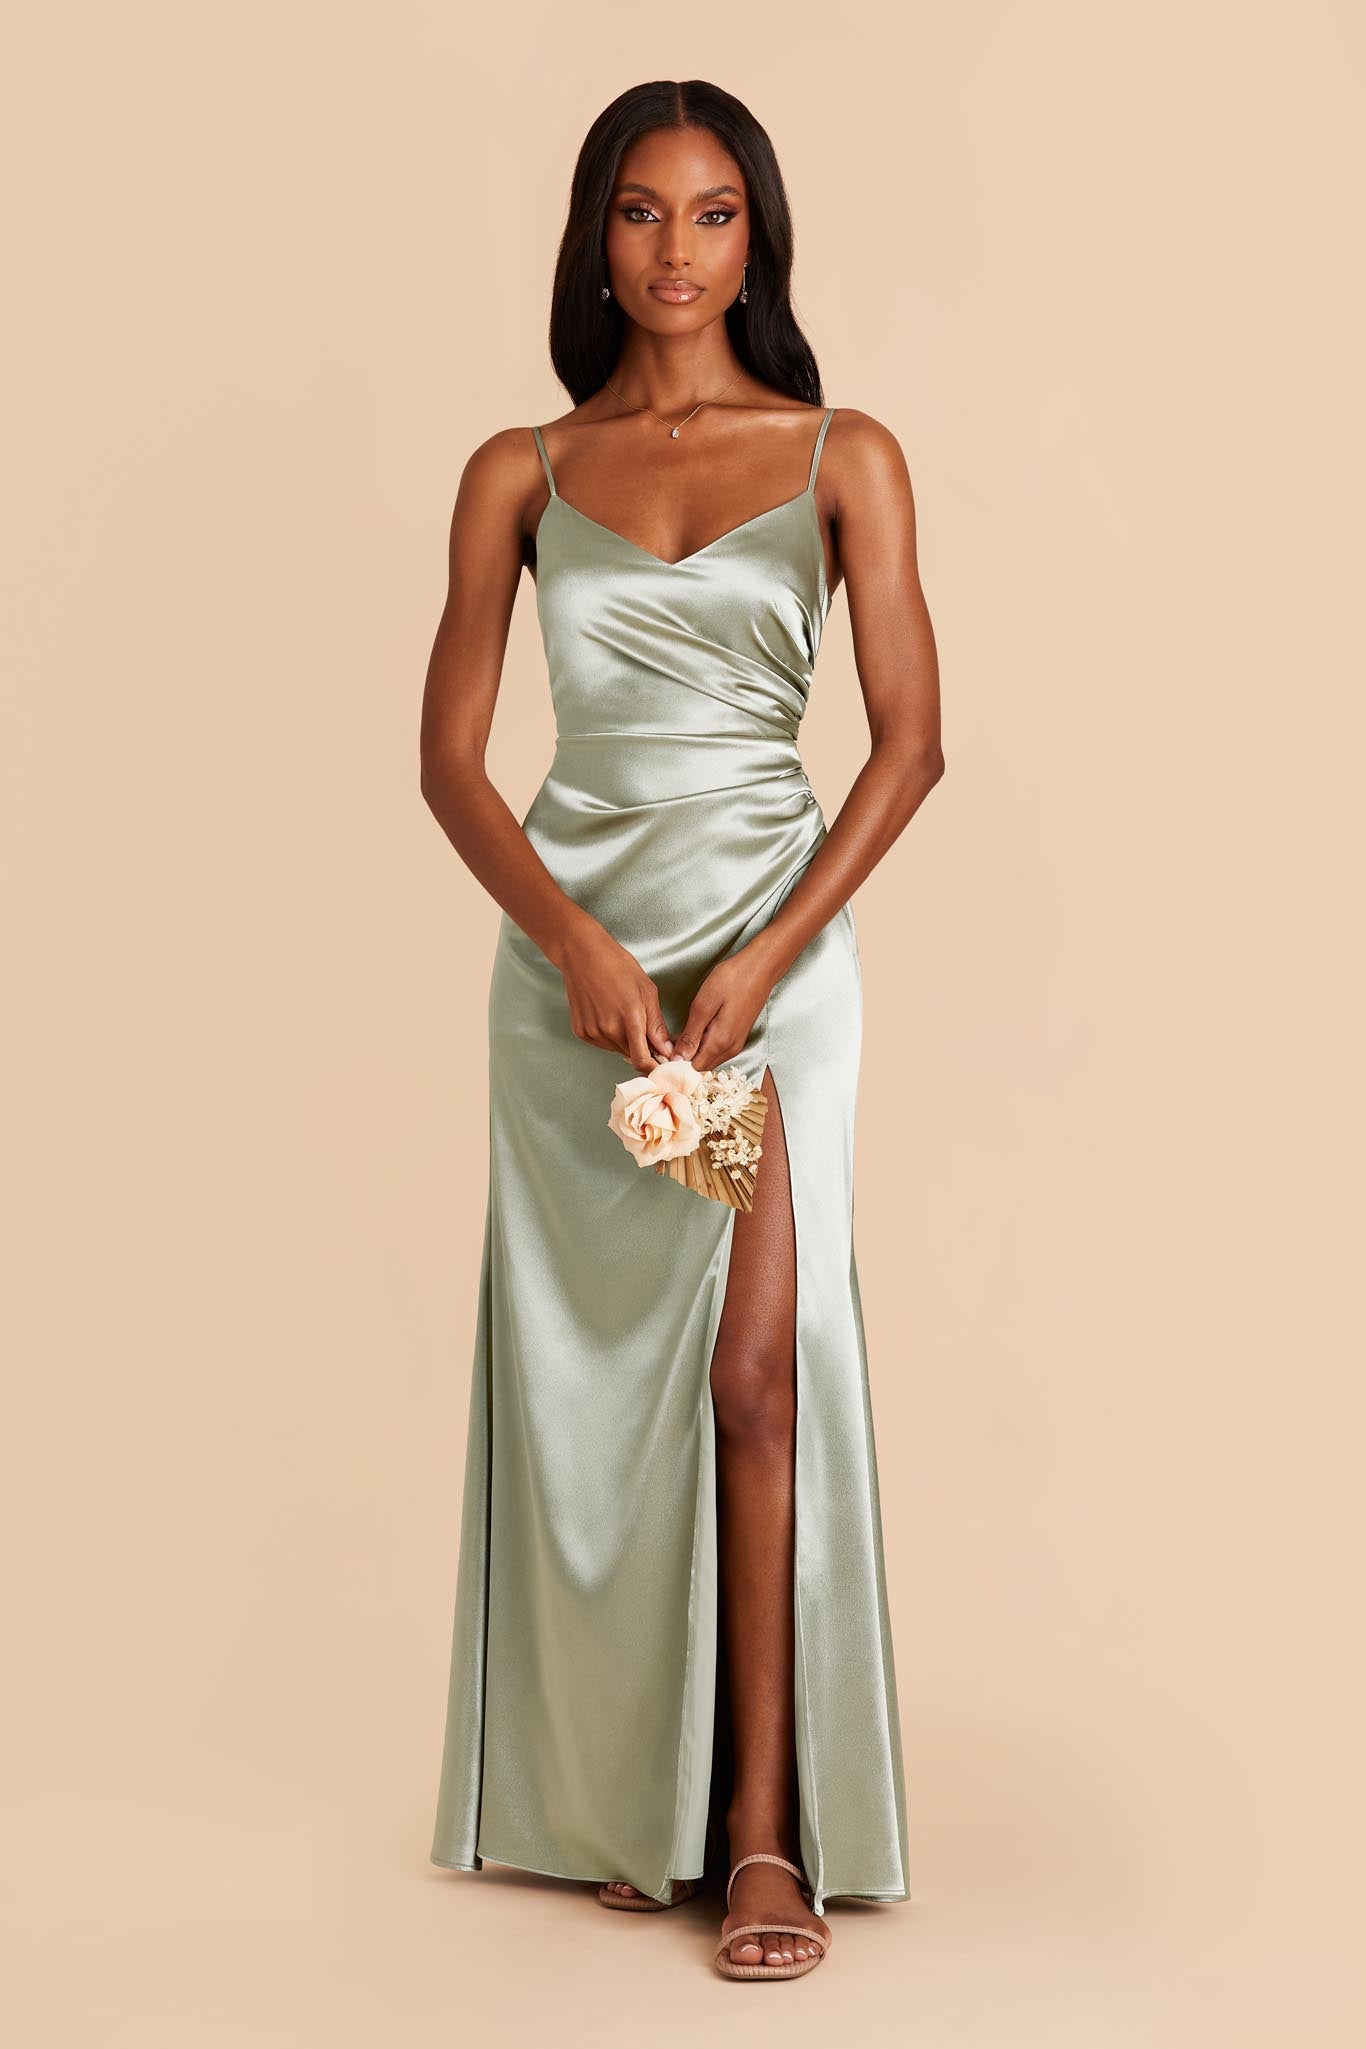 Bridesmaid Dresses Starting From $99 | Birdy Grey